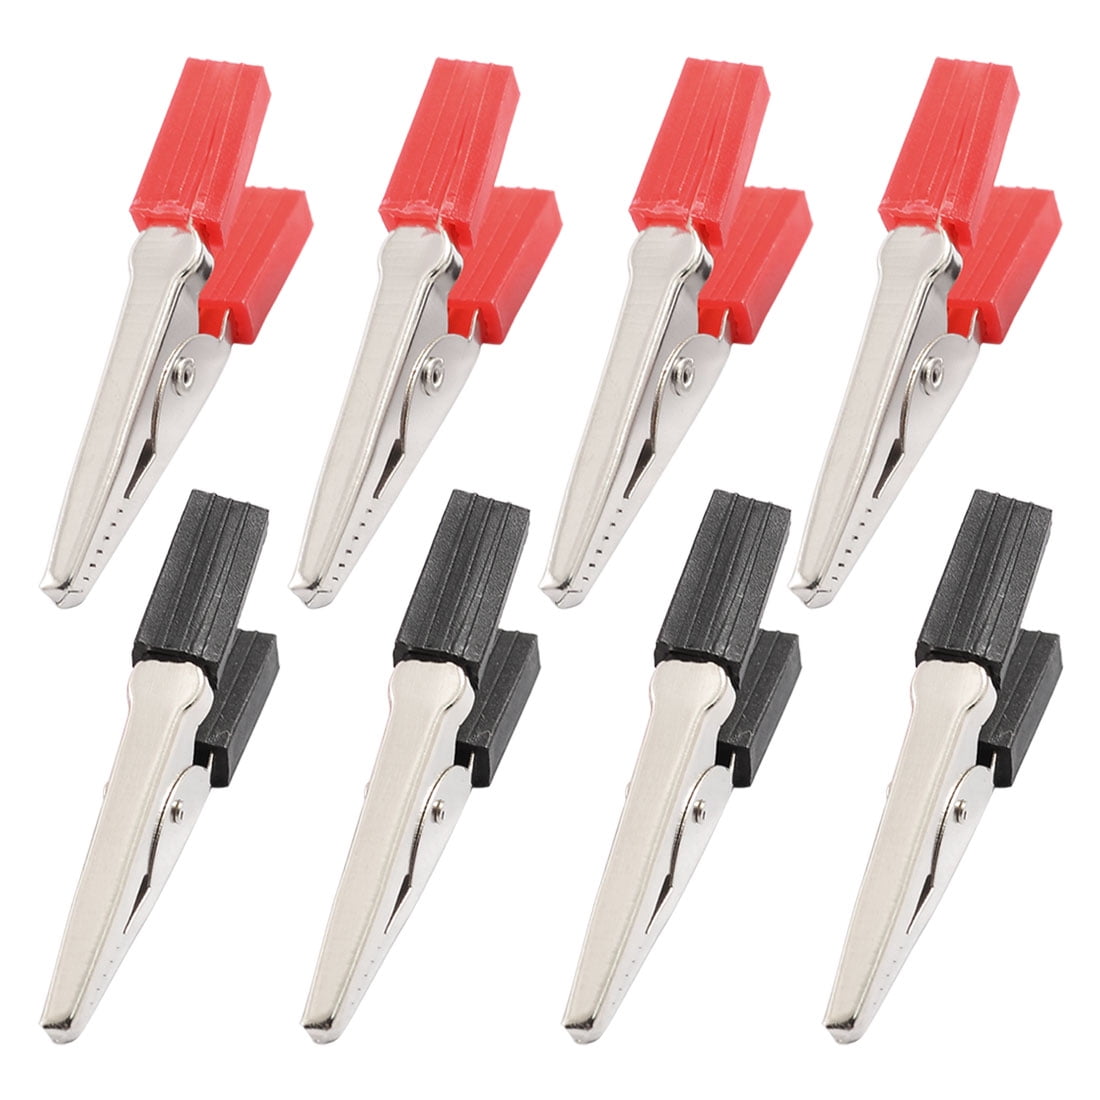 8x Crocodile Alligator Clips Connectors for Test Leads Red and Black 28mm 